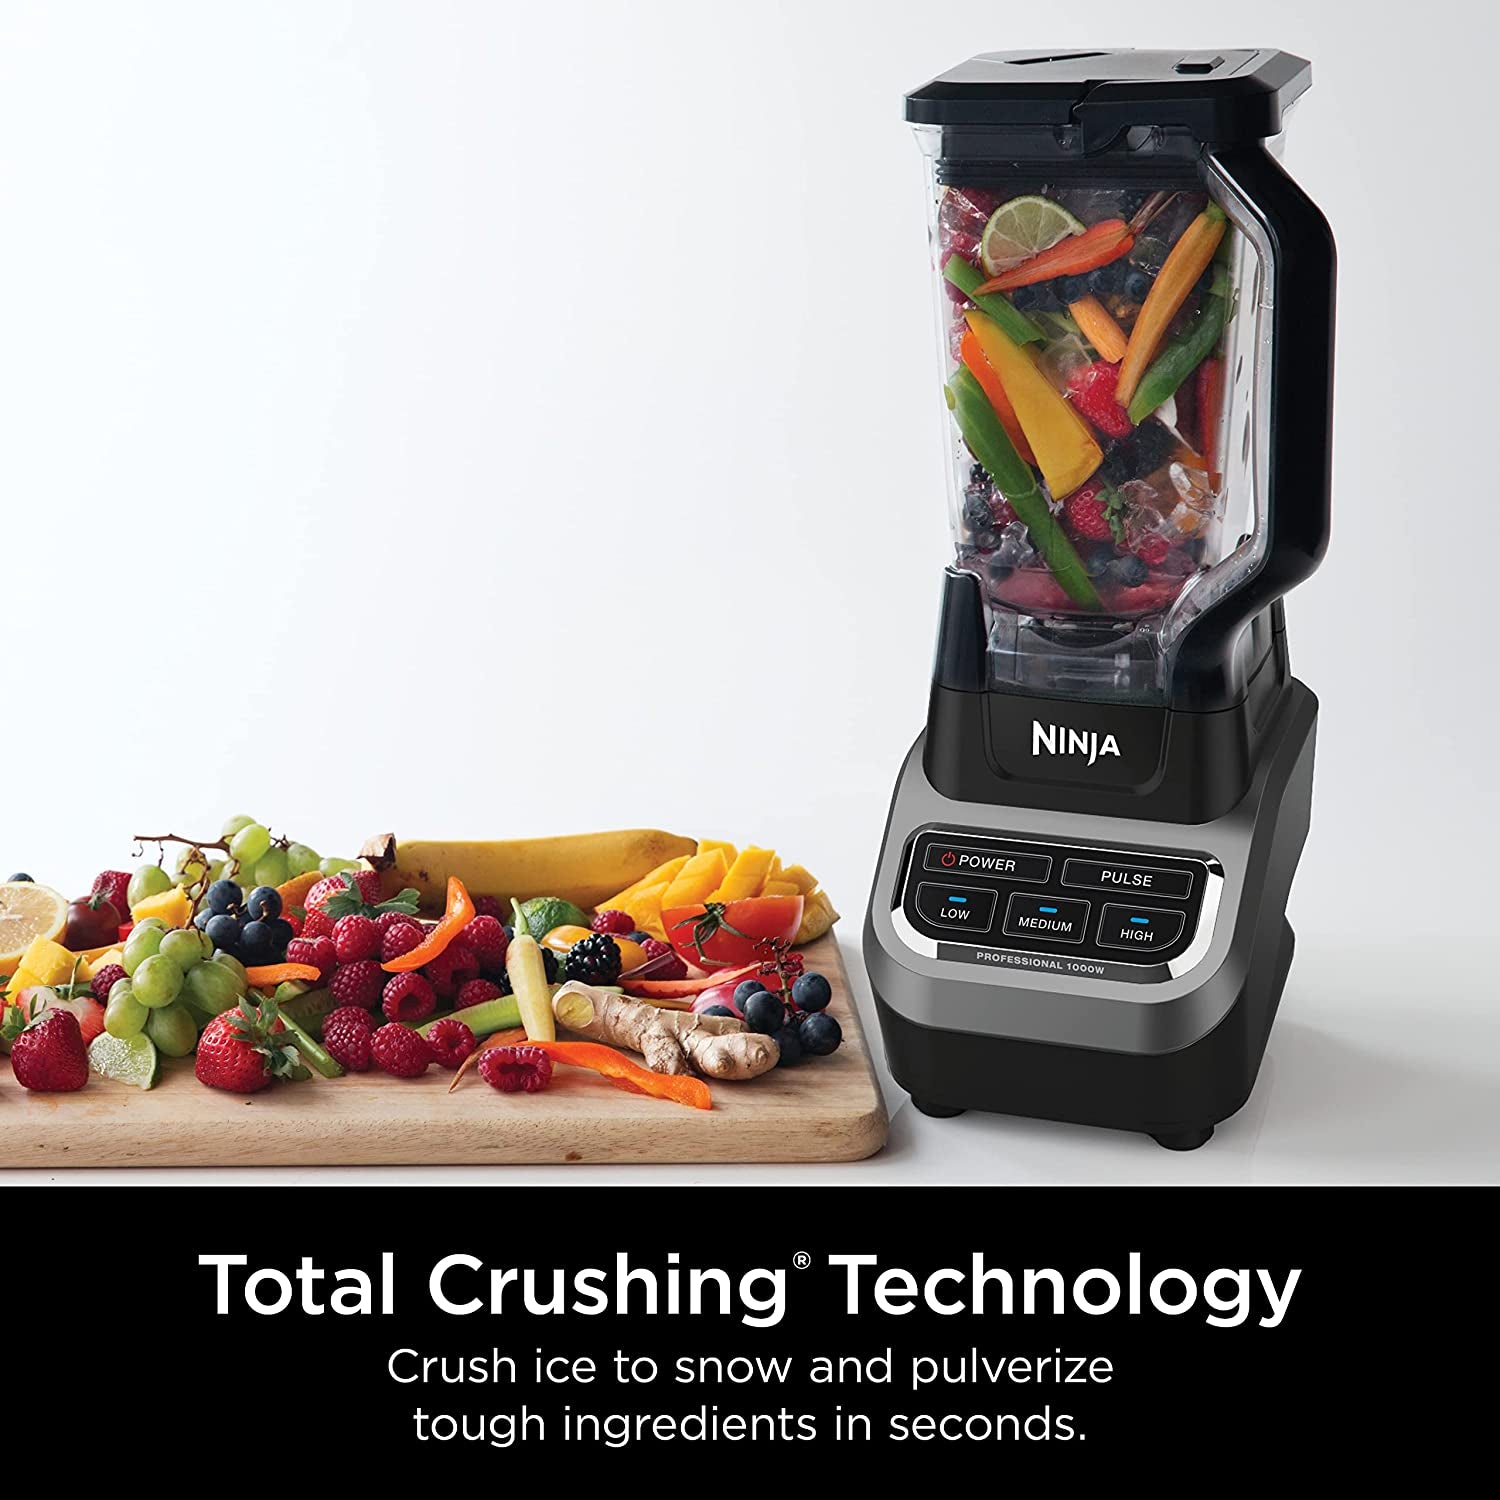 BL610 Professional 72 Oz Countertop 1000-Watt Base and Total Crushing Technology for Smoothies, Ice and Frozen Fruit, Black, Blender + Pitcher